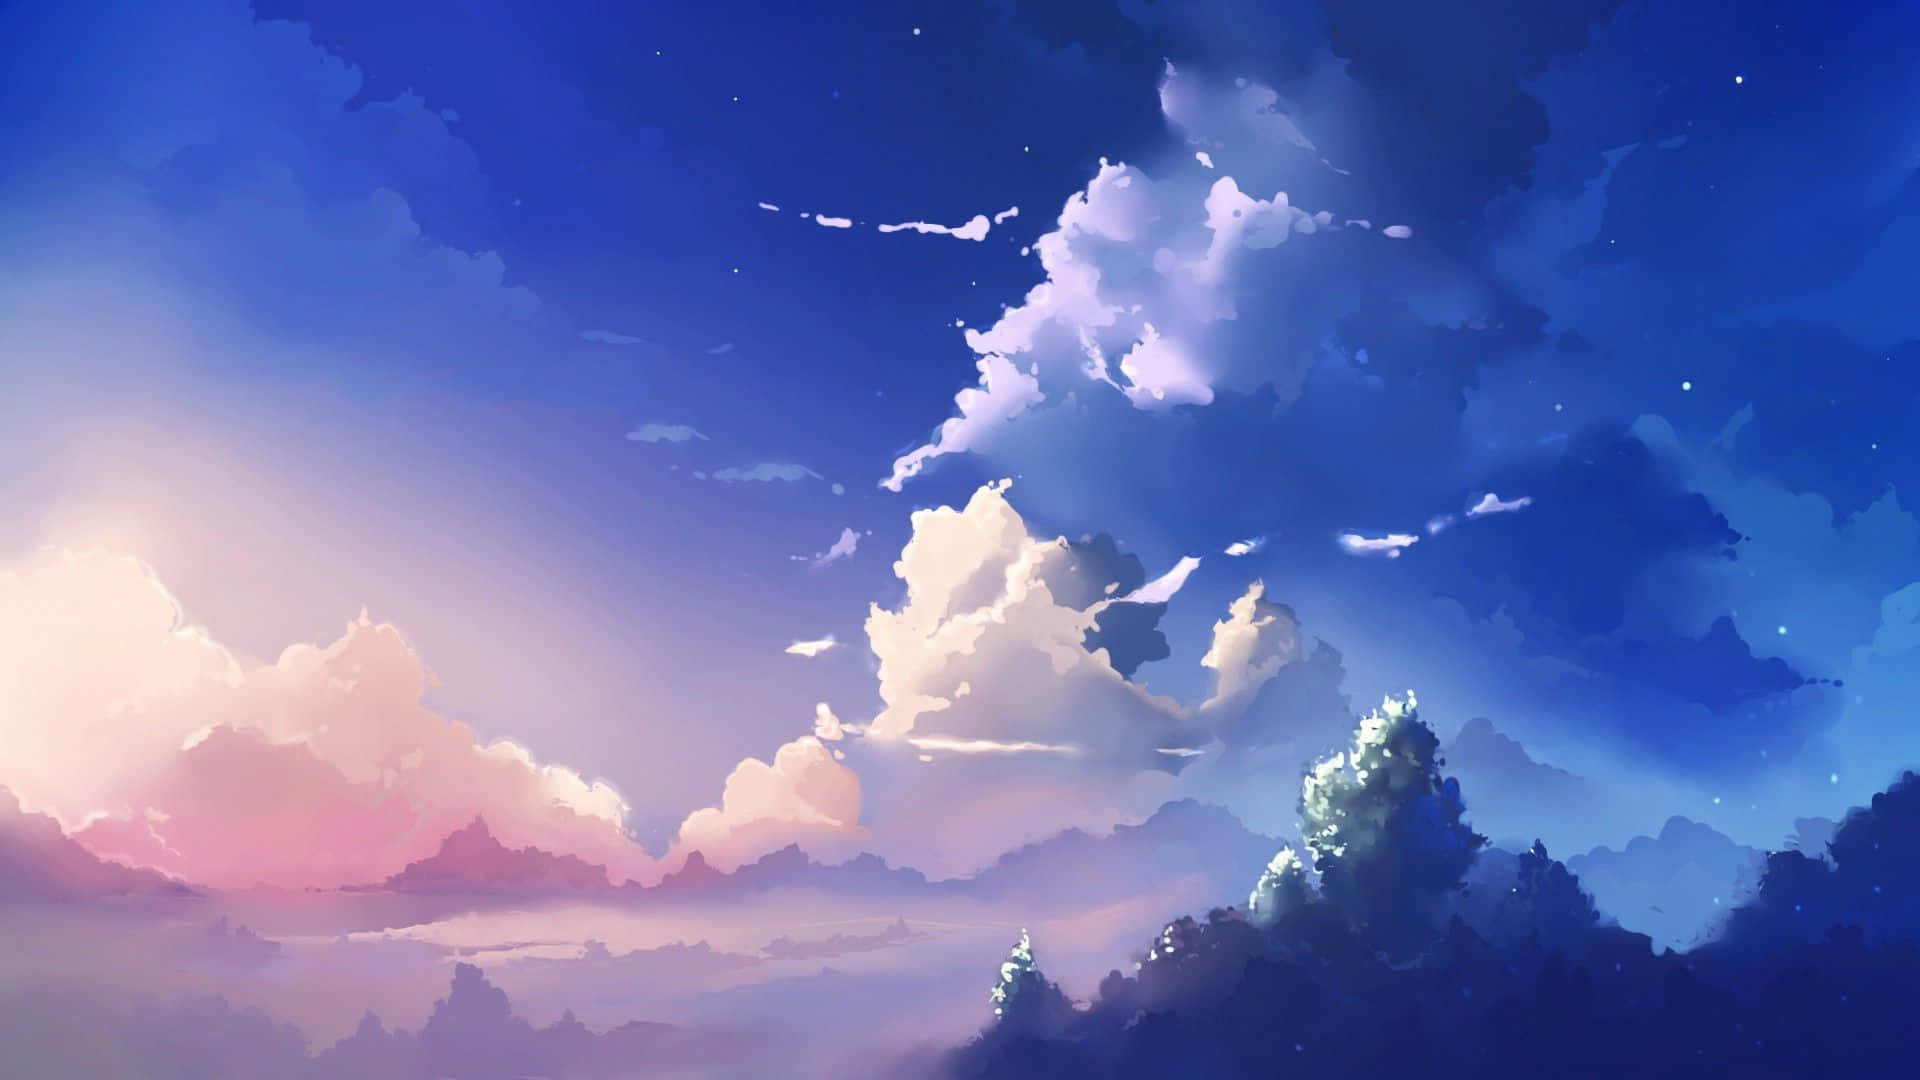 Enjoy A Peaceful Nature View With This Cute Anime-style Landscape